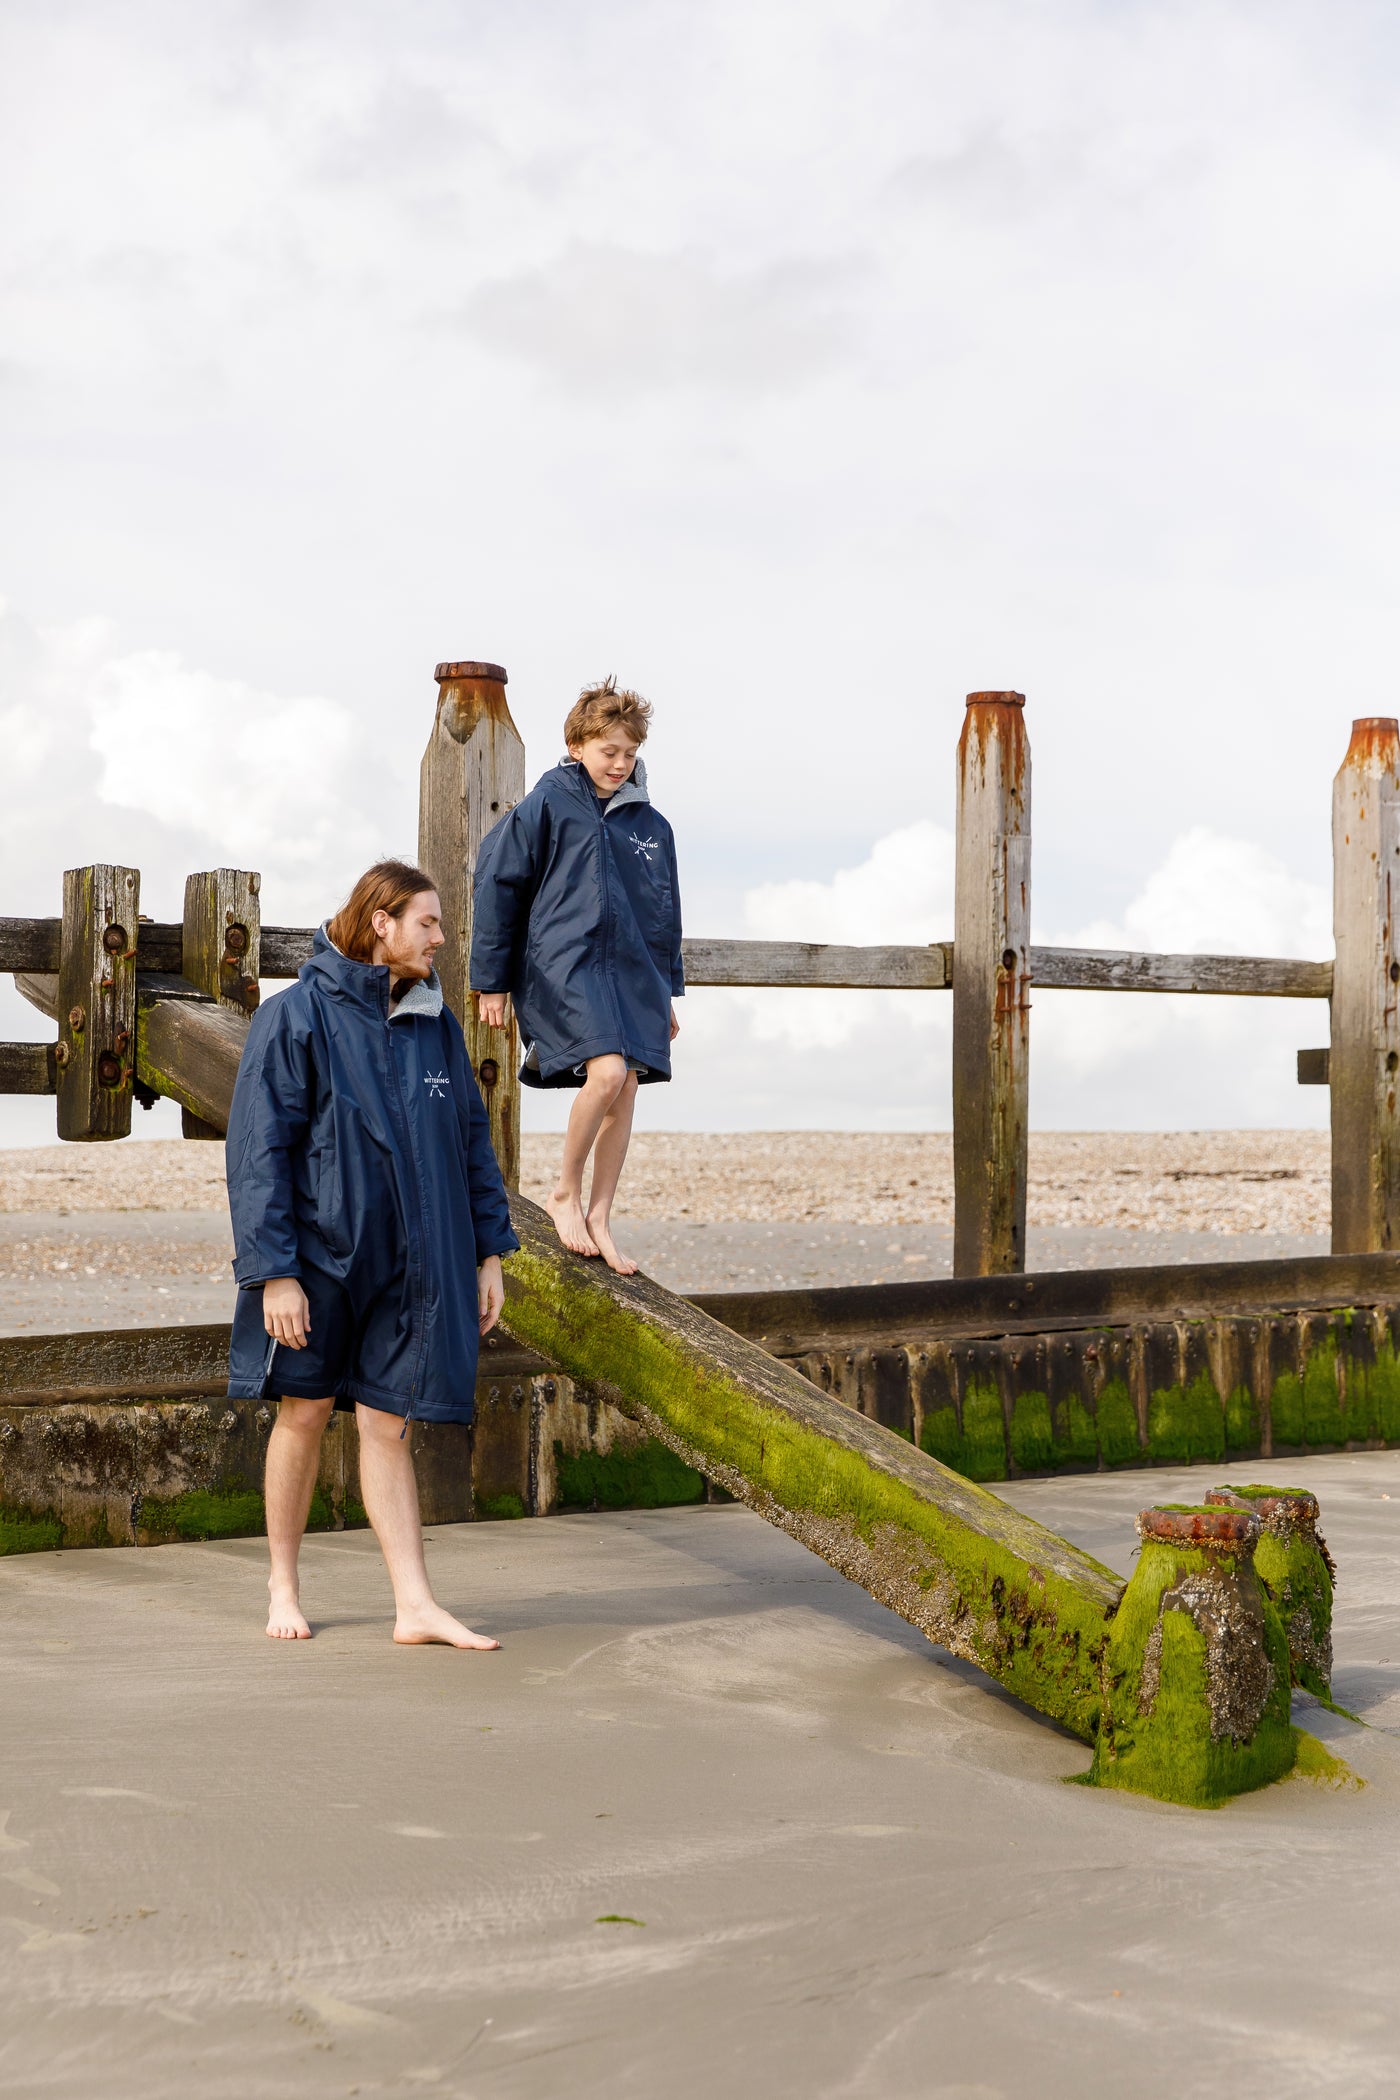 WITTERING SURF ARCTIC ROBE - NAVY - Wittering Surf Shop